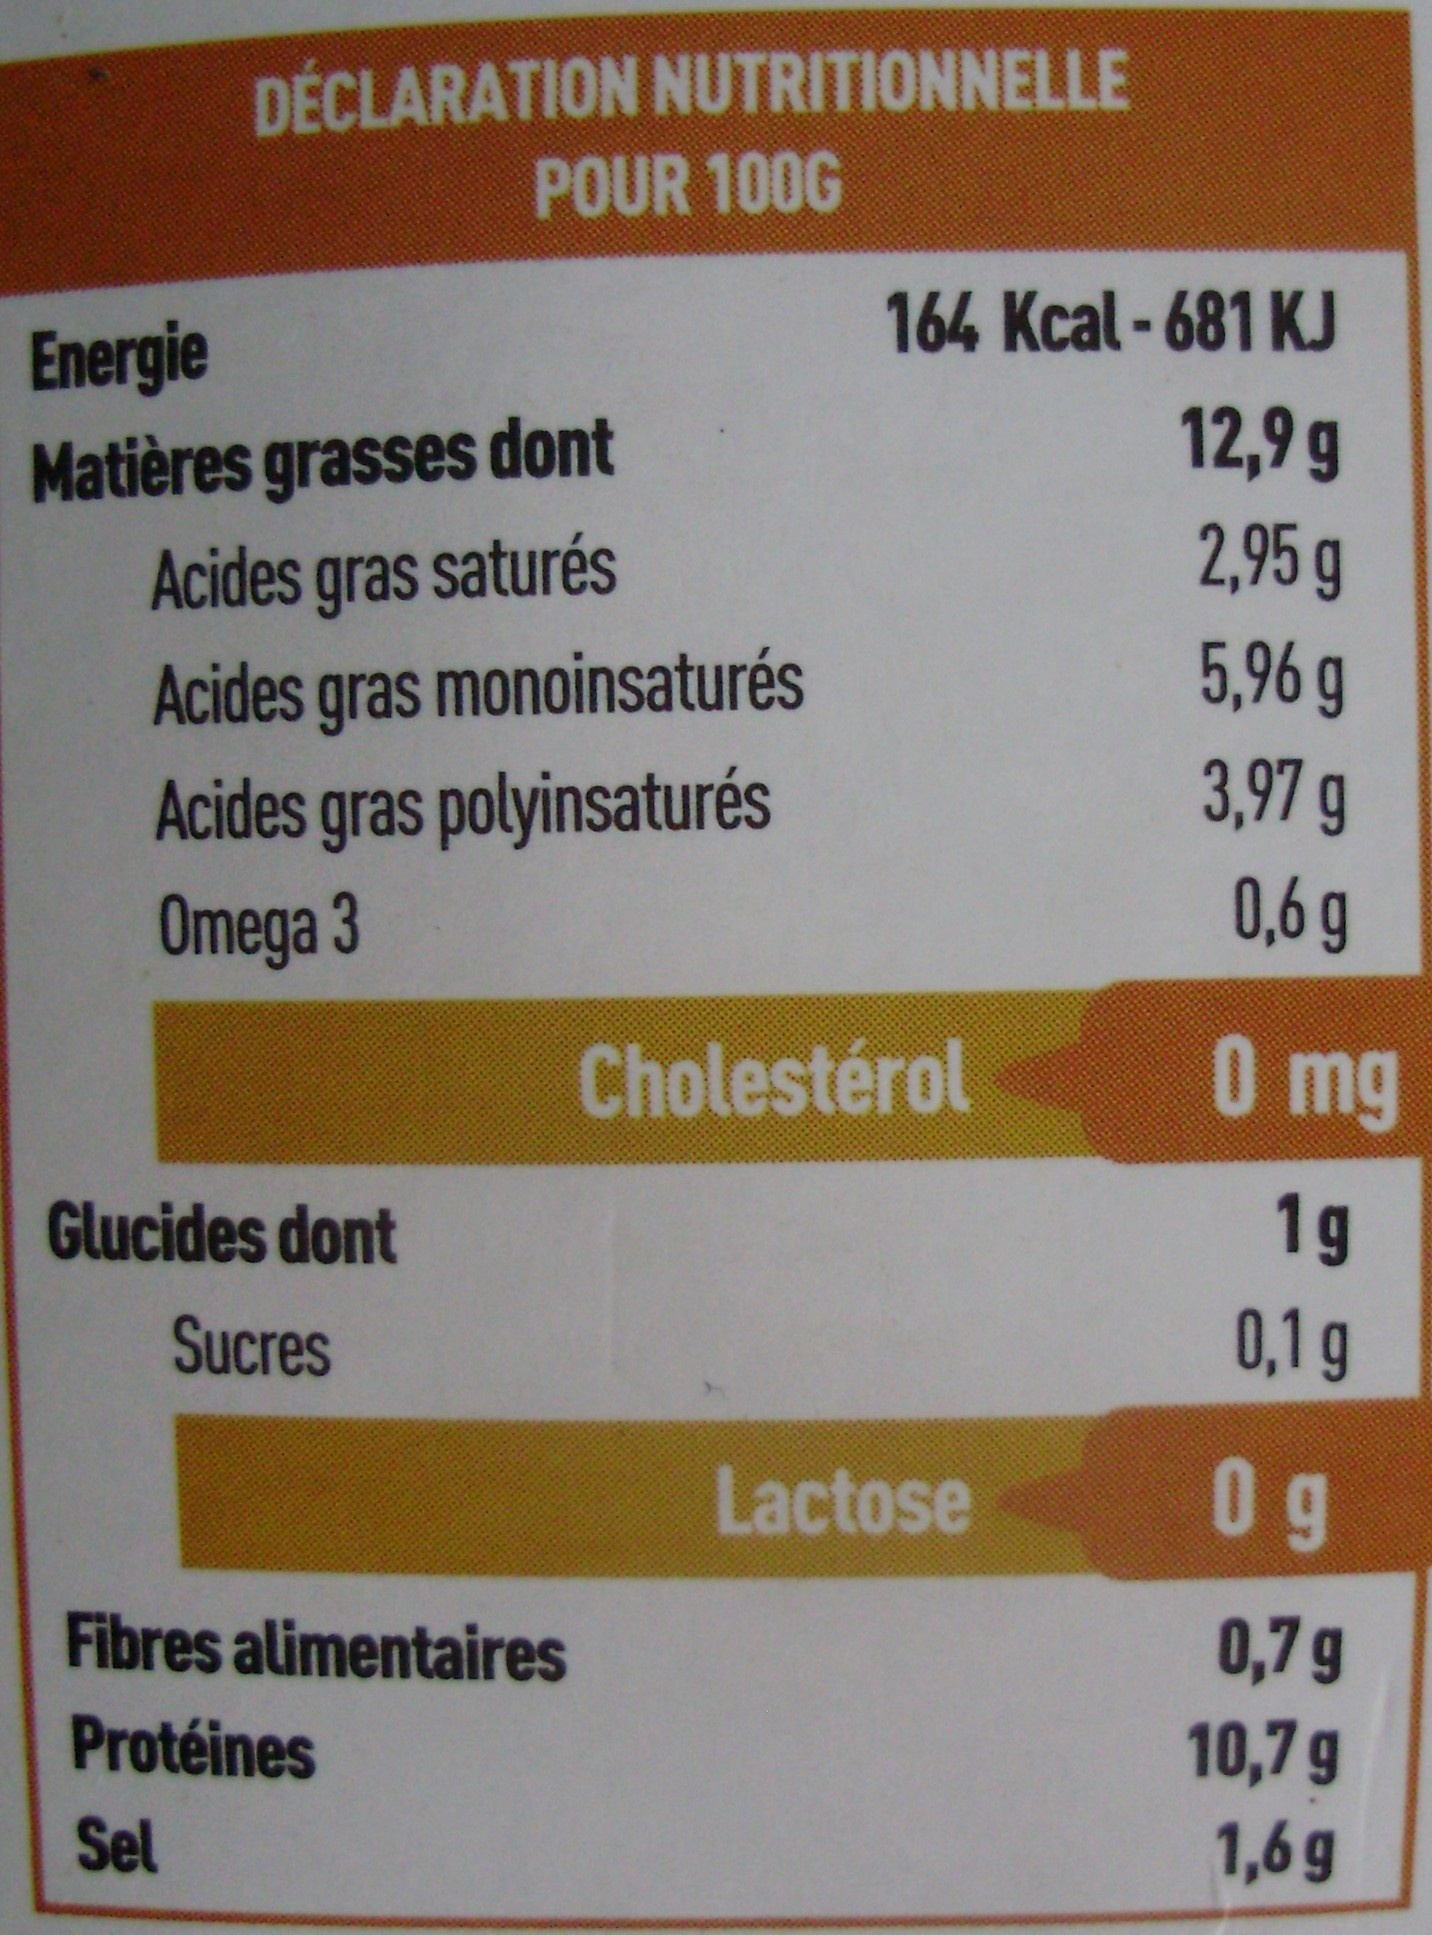 Tartine & moi comme un fromage Cumin Bio (12,9 % MG) - Nutrition facts - fr